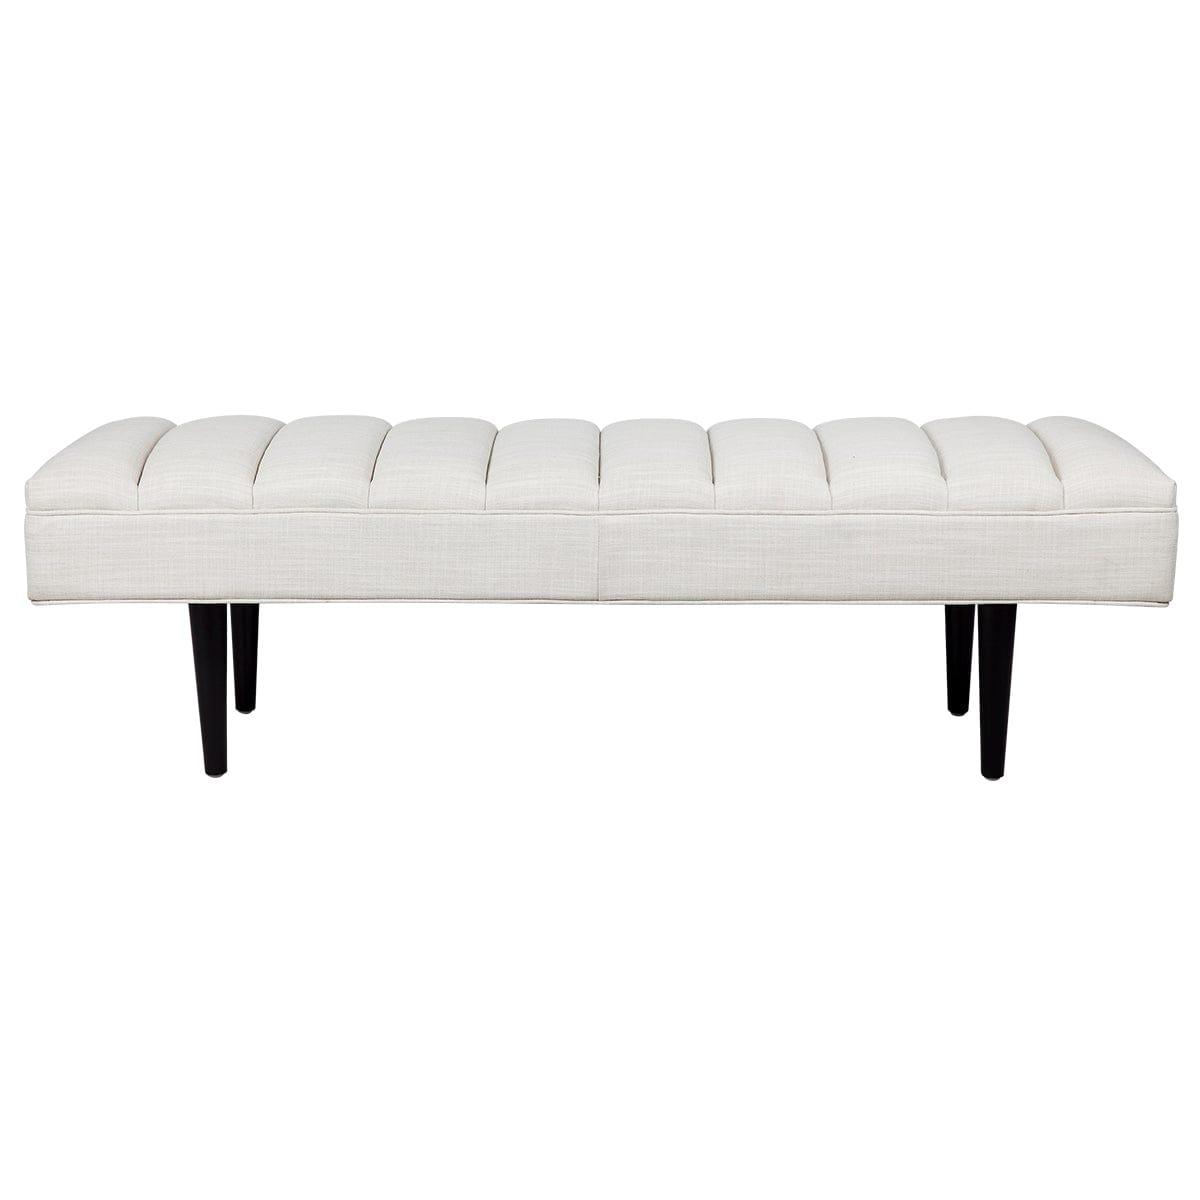 House Journey Central Park Panelled Bench Ottoman - Natural Linen